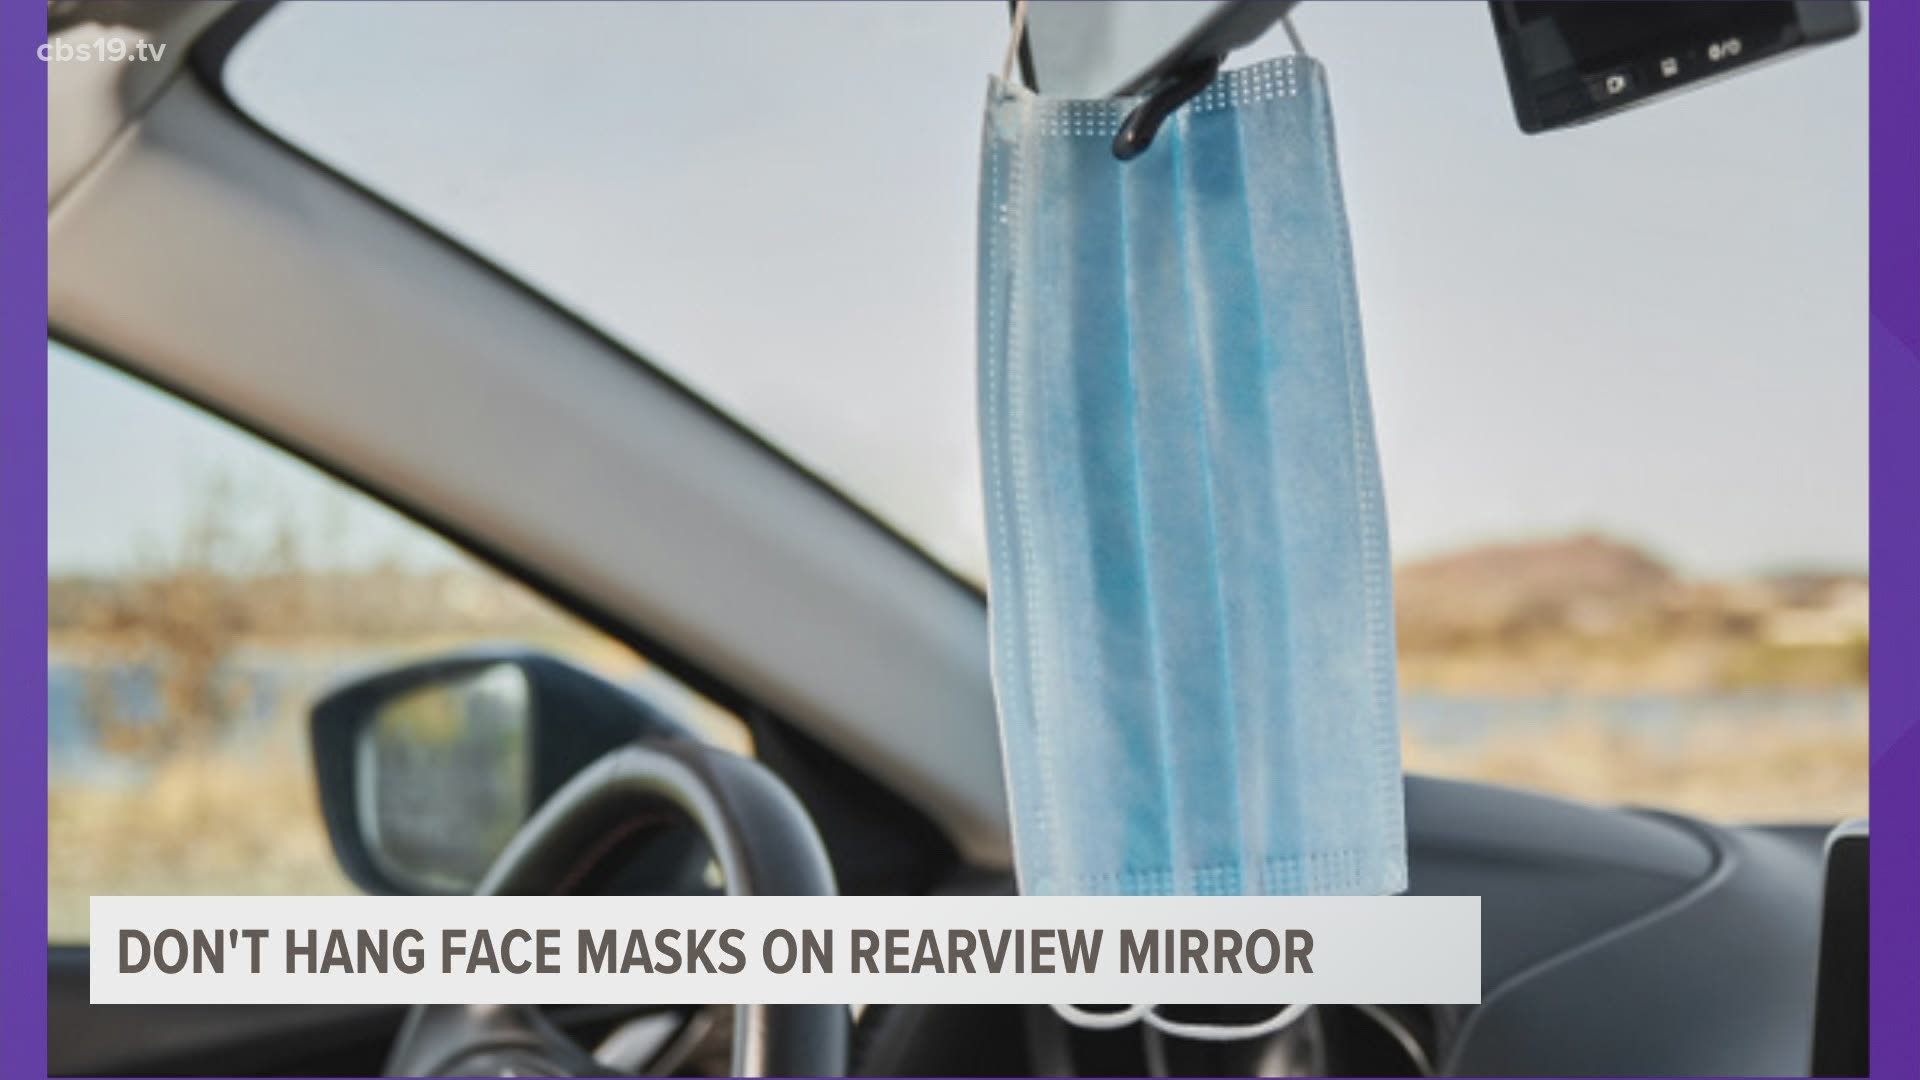 AAA Texas says that hanging a mask from the rearview mirror can impair vision and cause a crash.